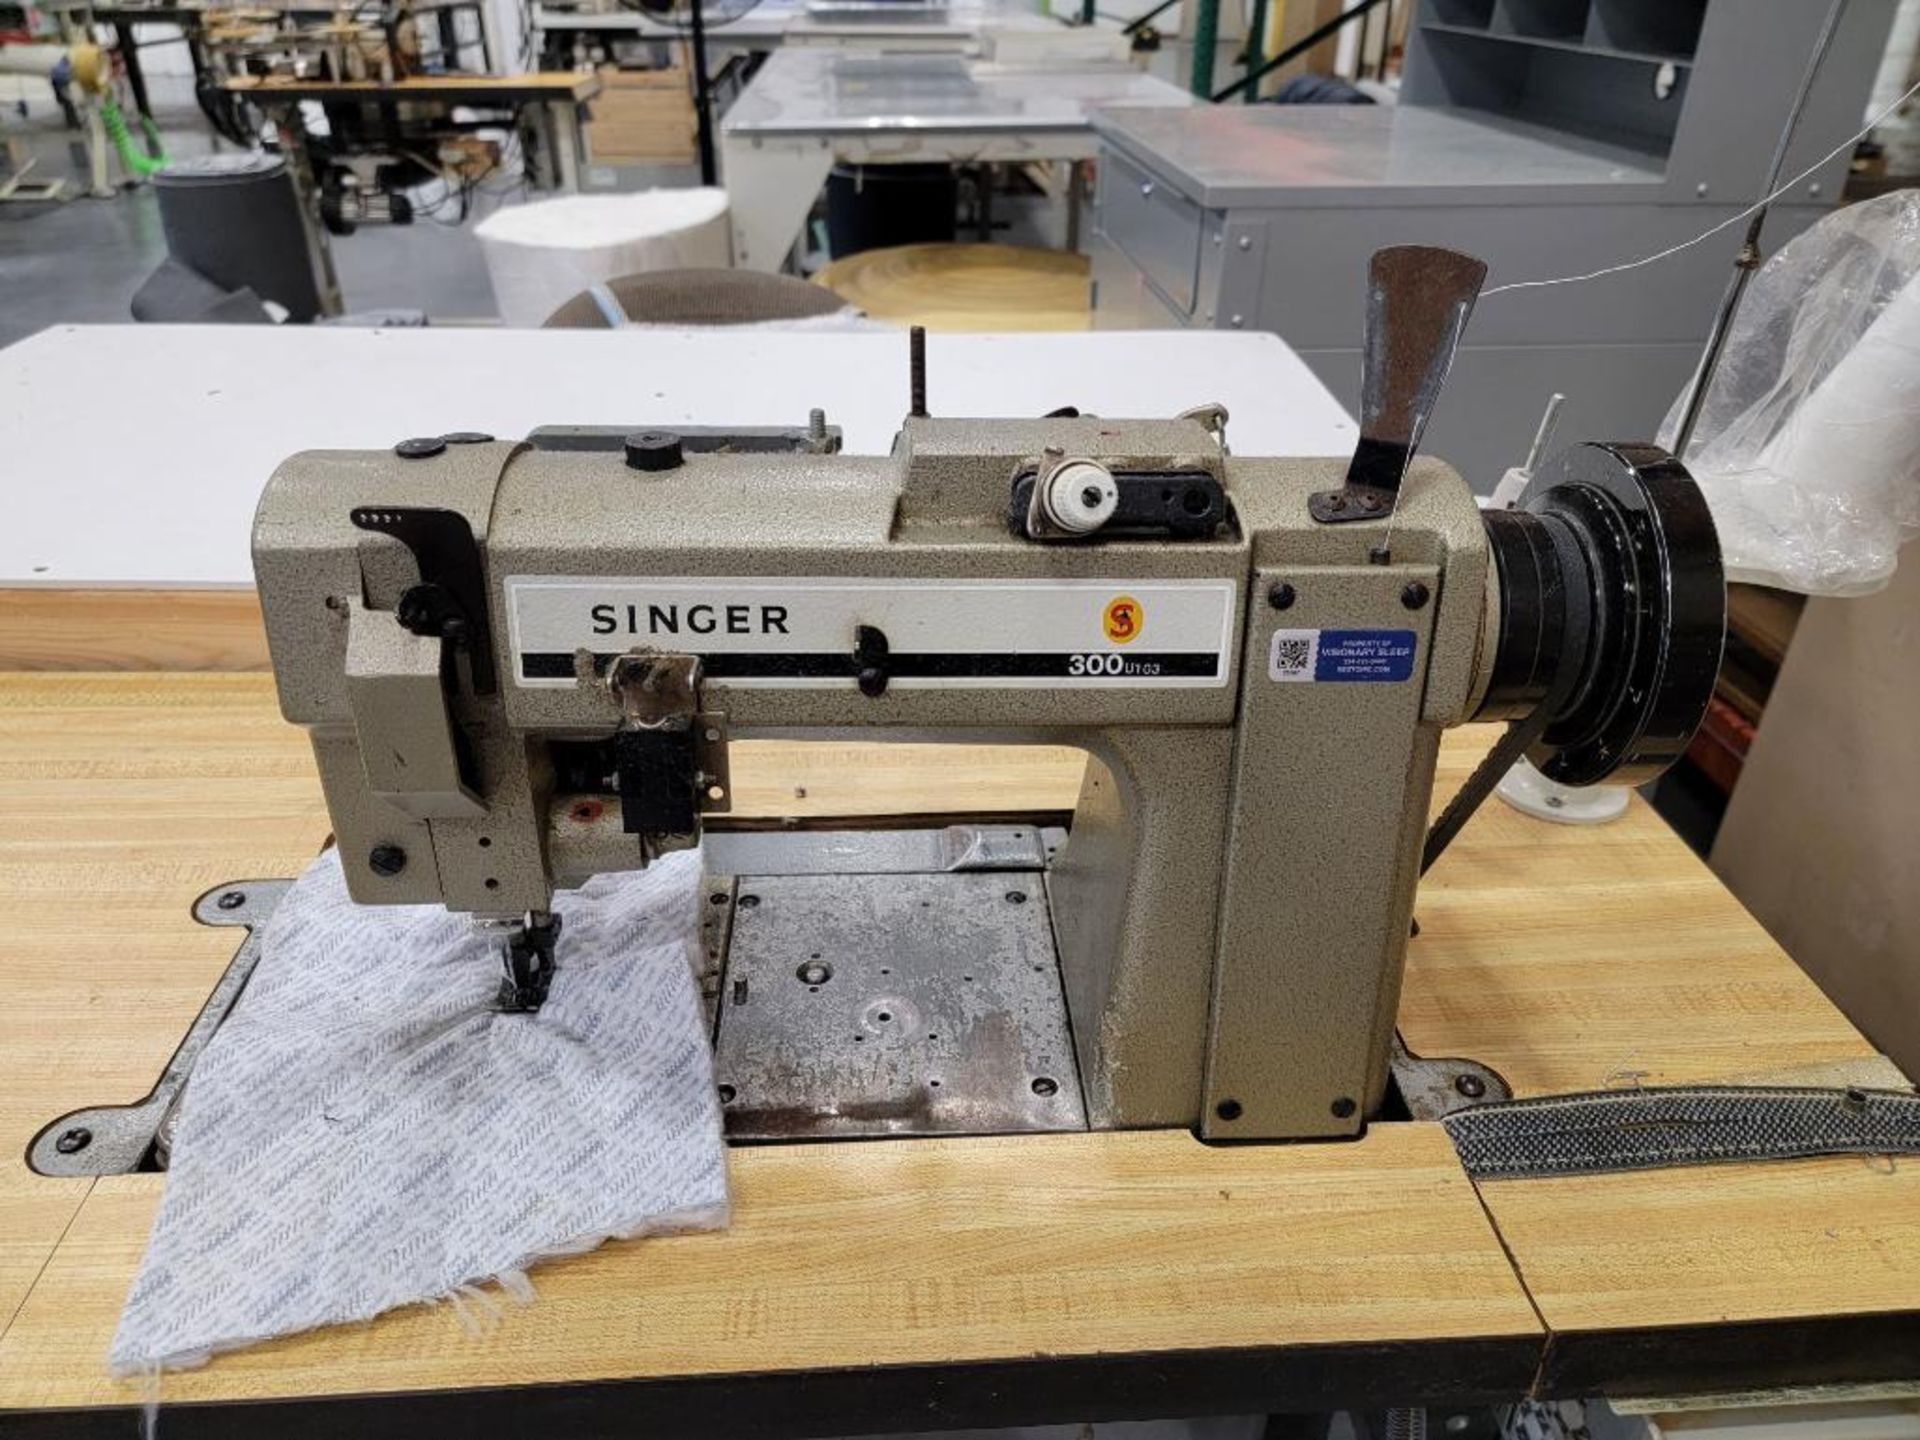 Singer Single Needle Sewing Machine Model 300U103 [25007] complete with Table, Foot Petal, and 110 V - Image 3 of 7